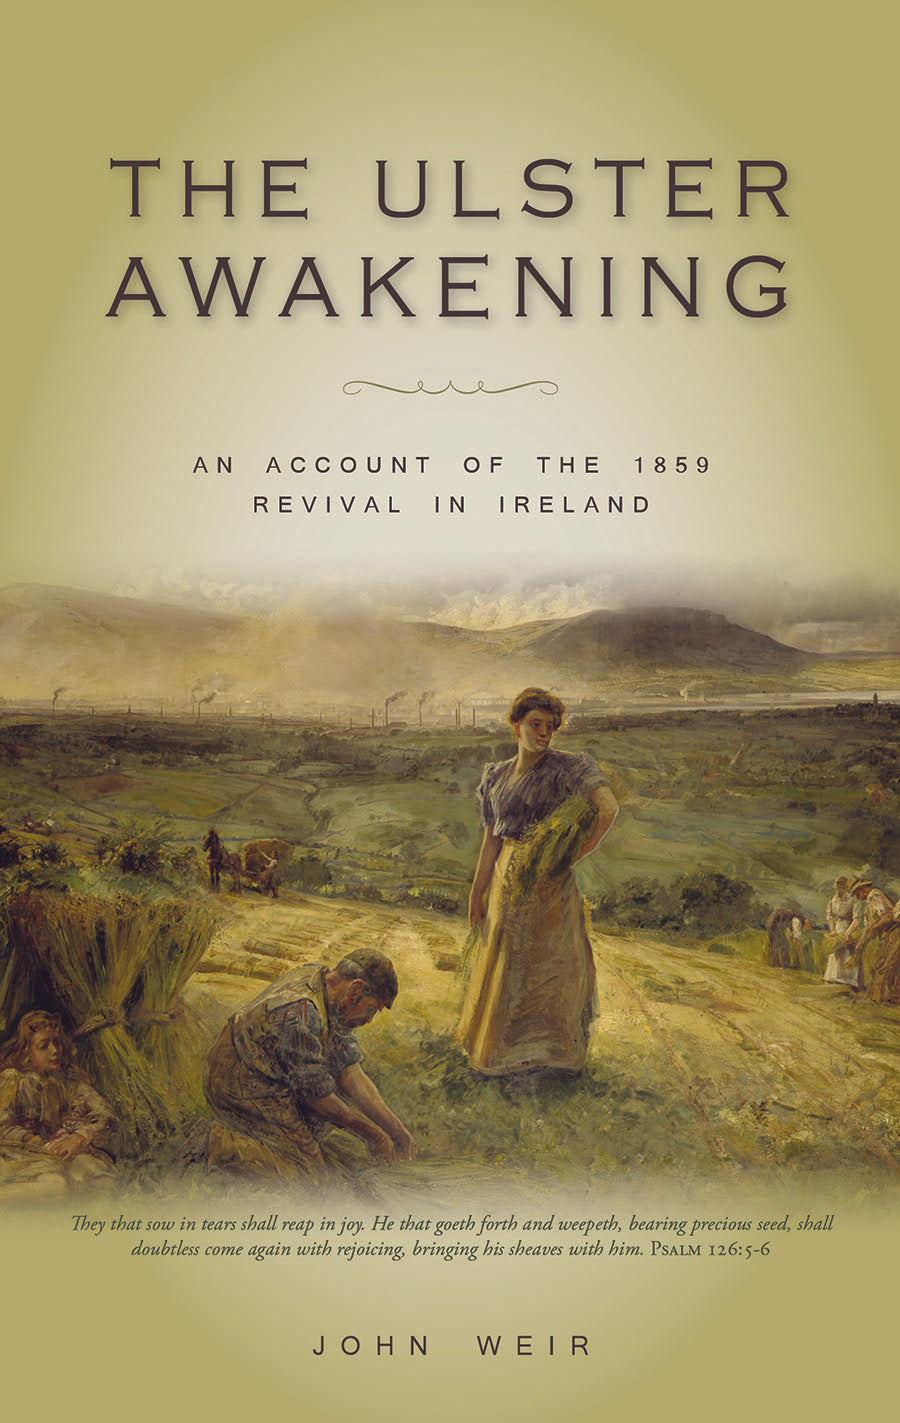 Image of The Ulster Awakening other